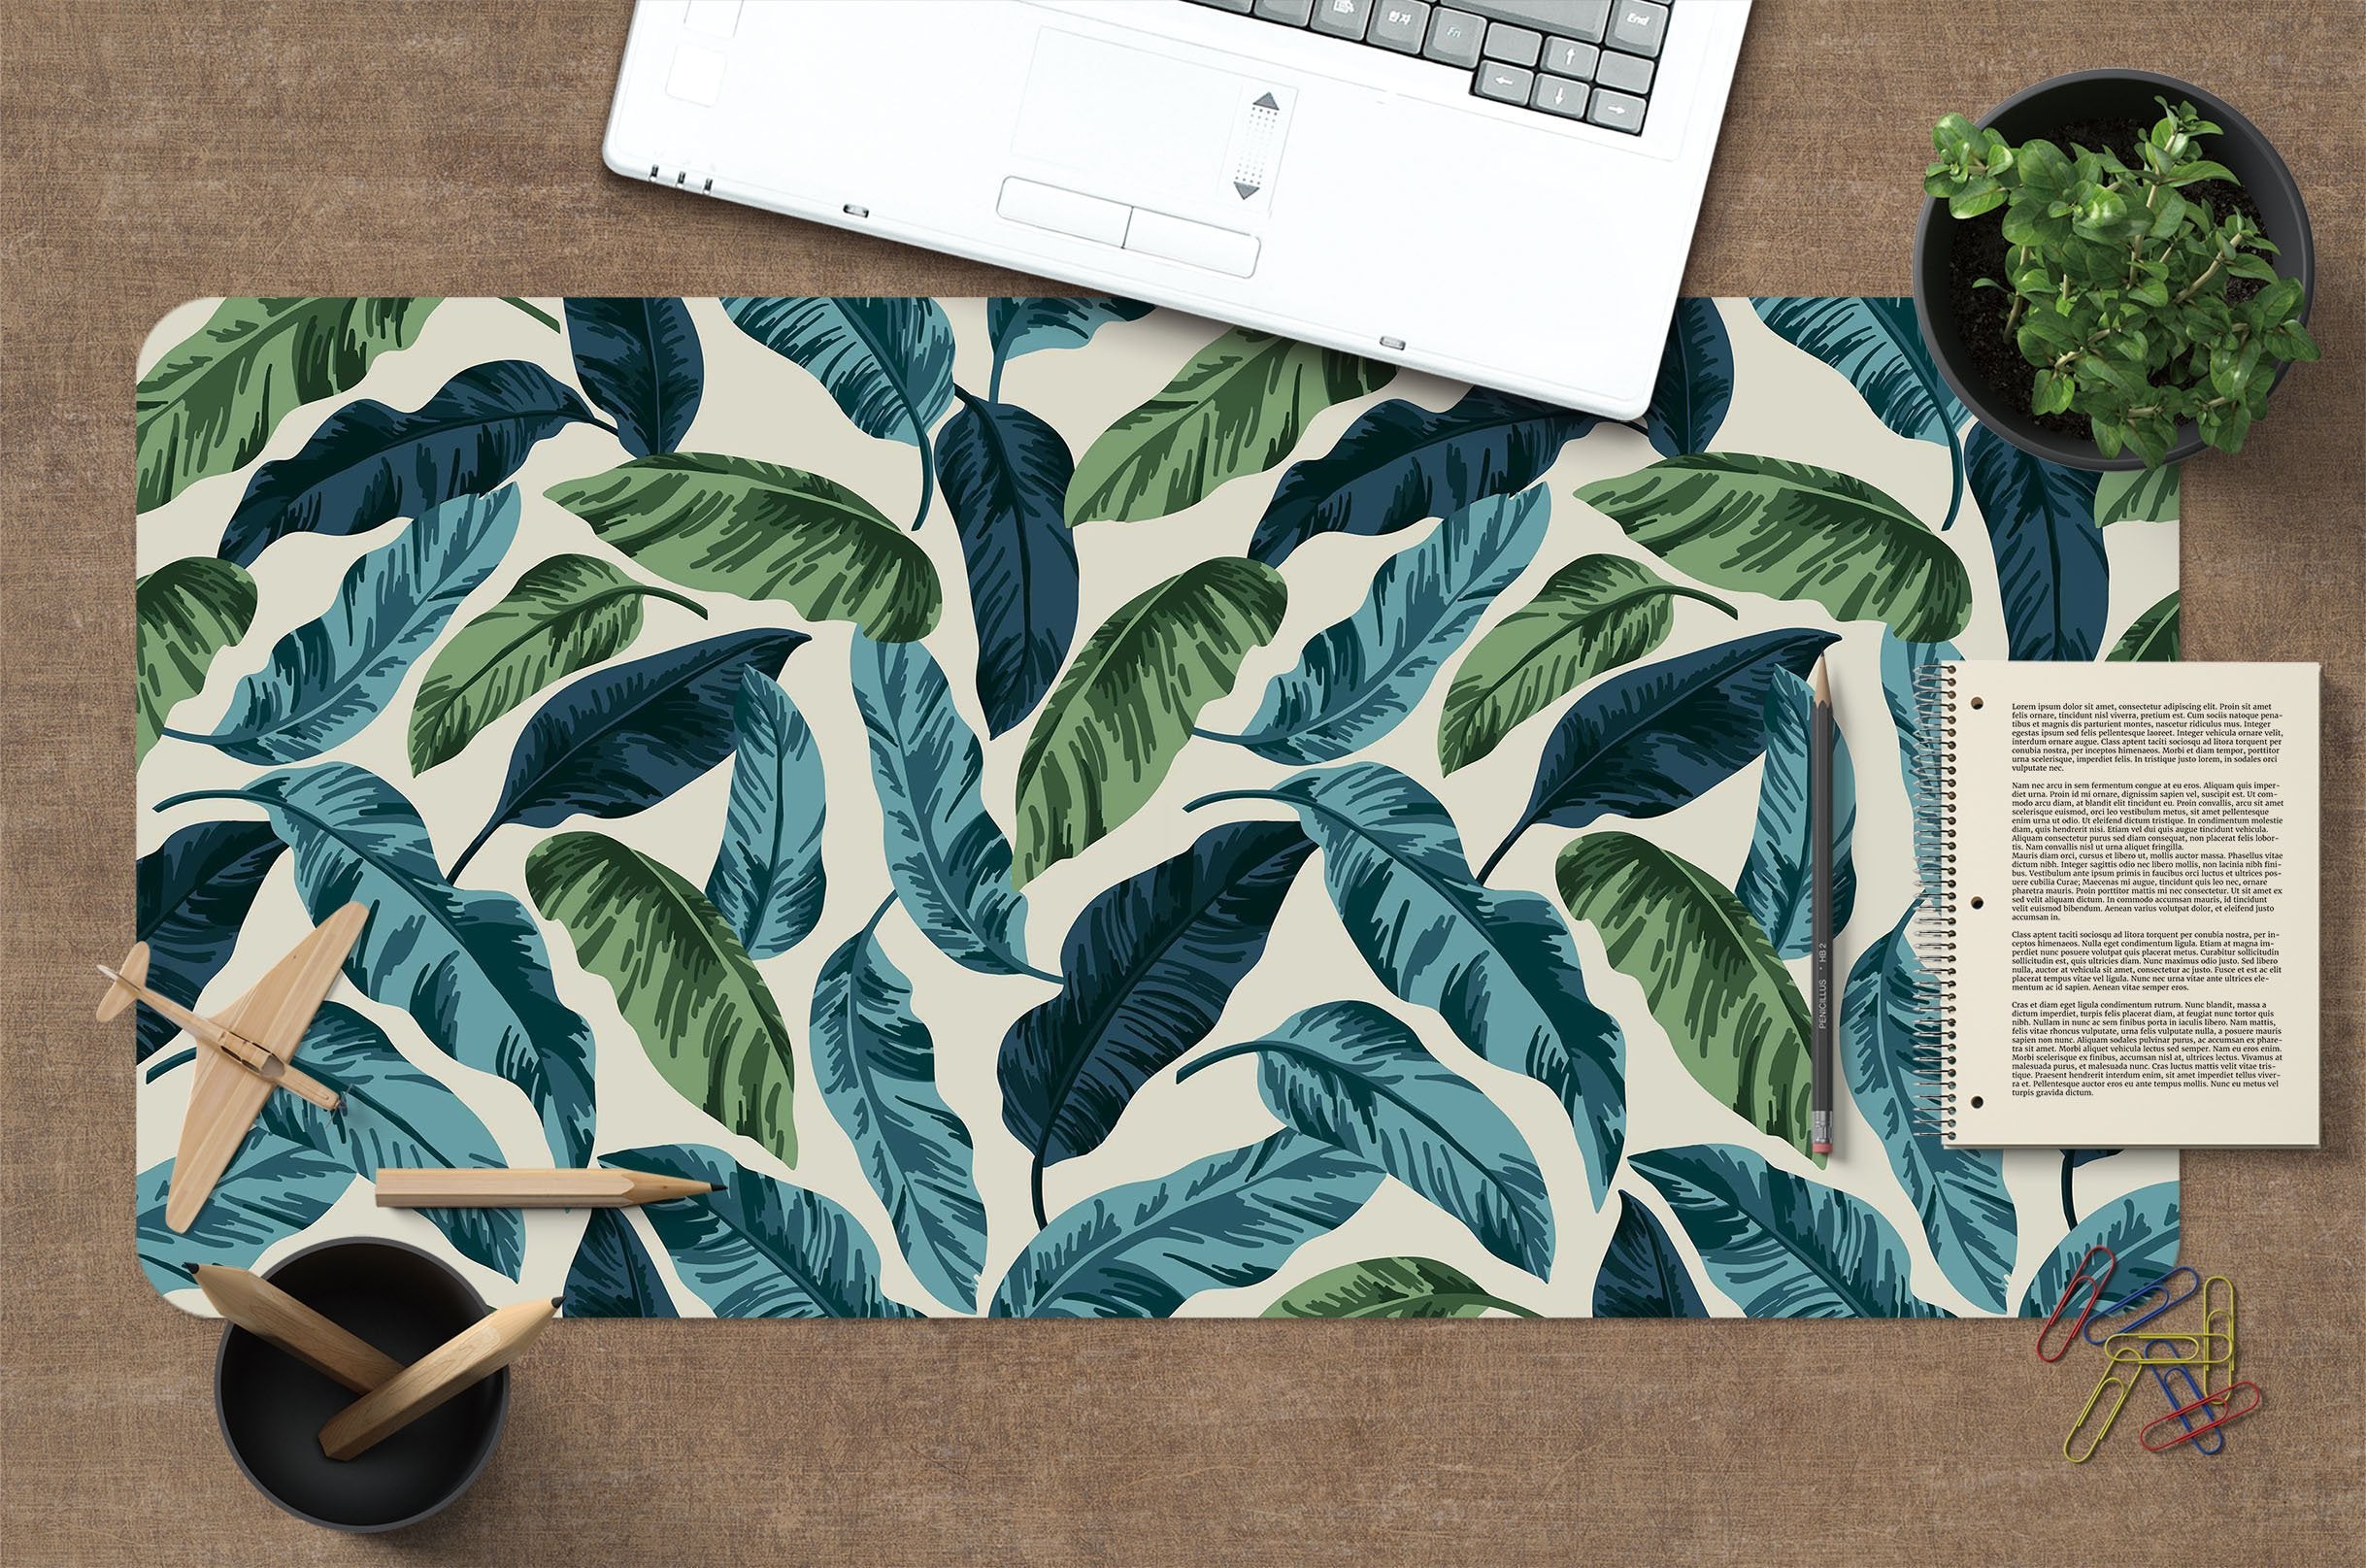 3D Covered With Leaves 168 Desk Mat Mat AJ Creativity Home 